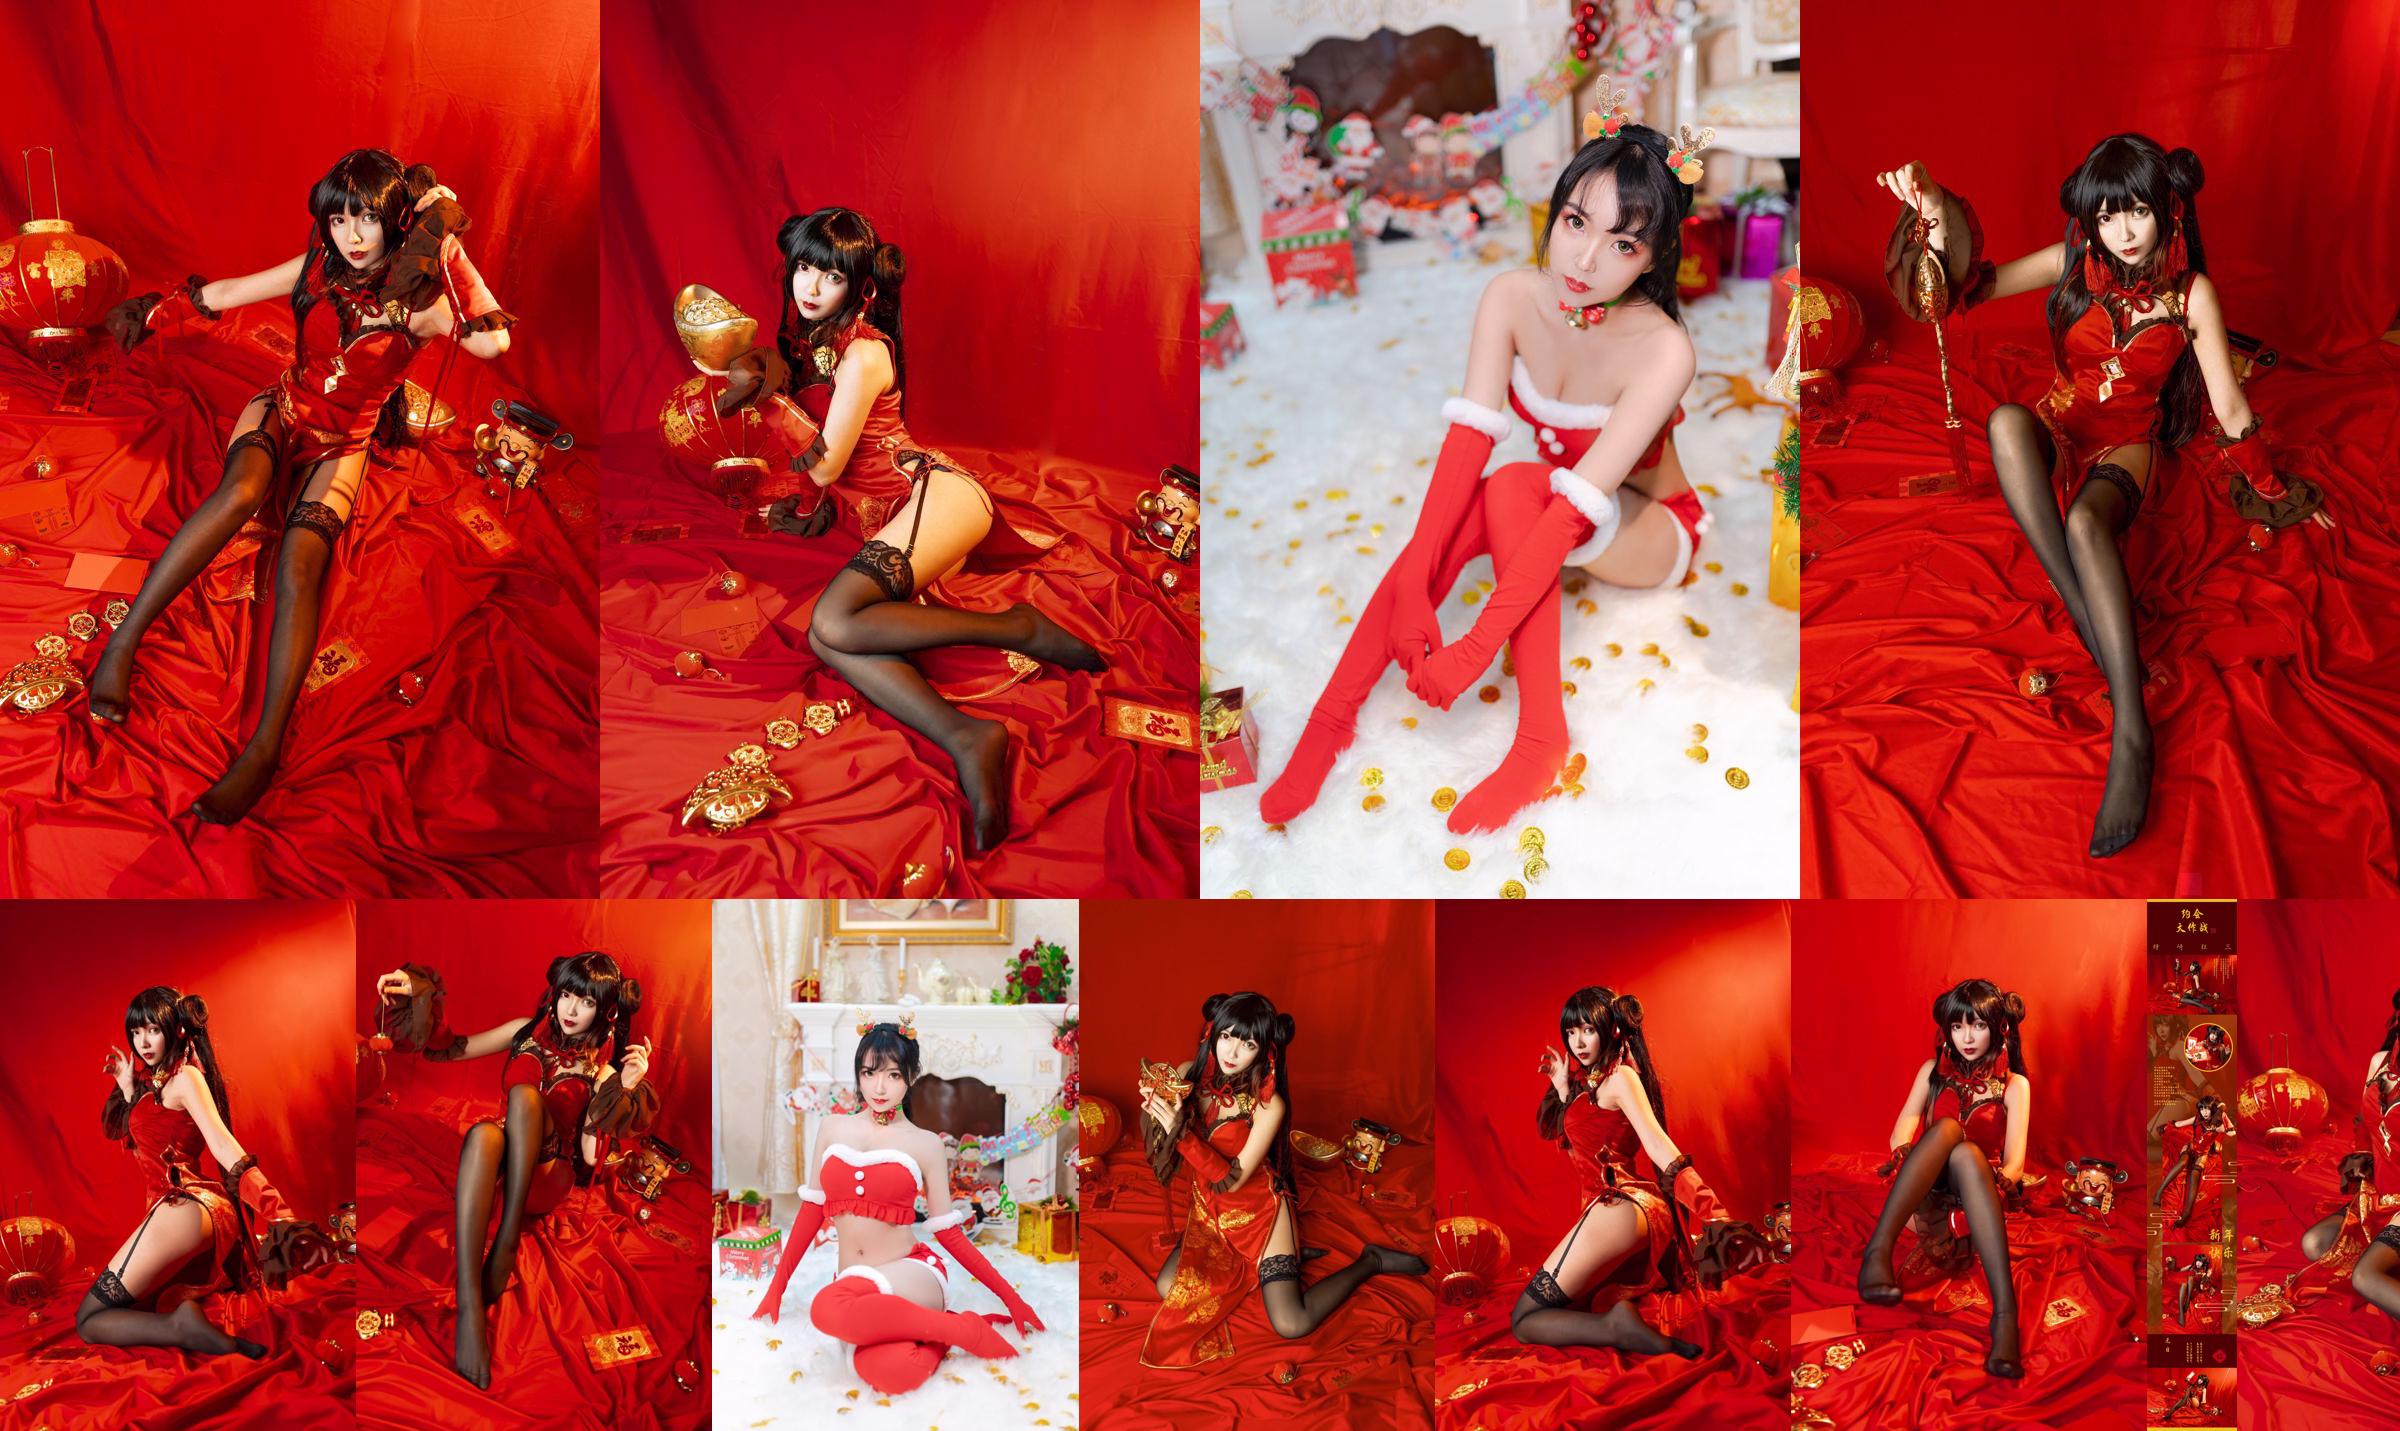 Coser model Yeonko is indestructible "Crazy Three New Year" No.1bcf7a Page 1